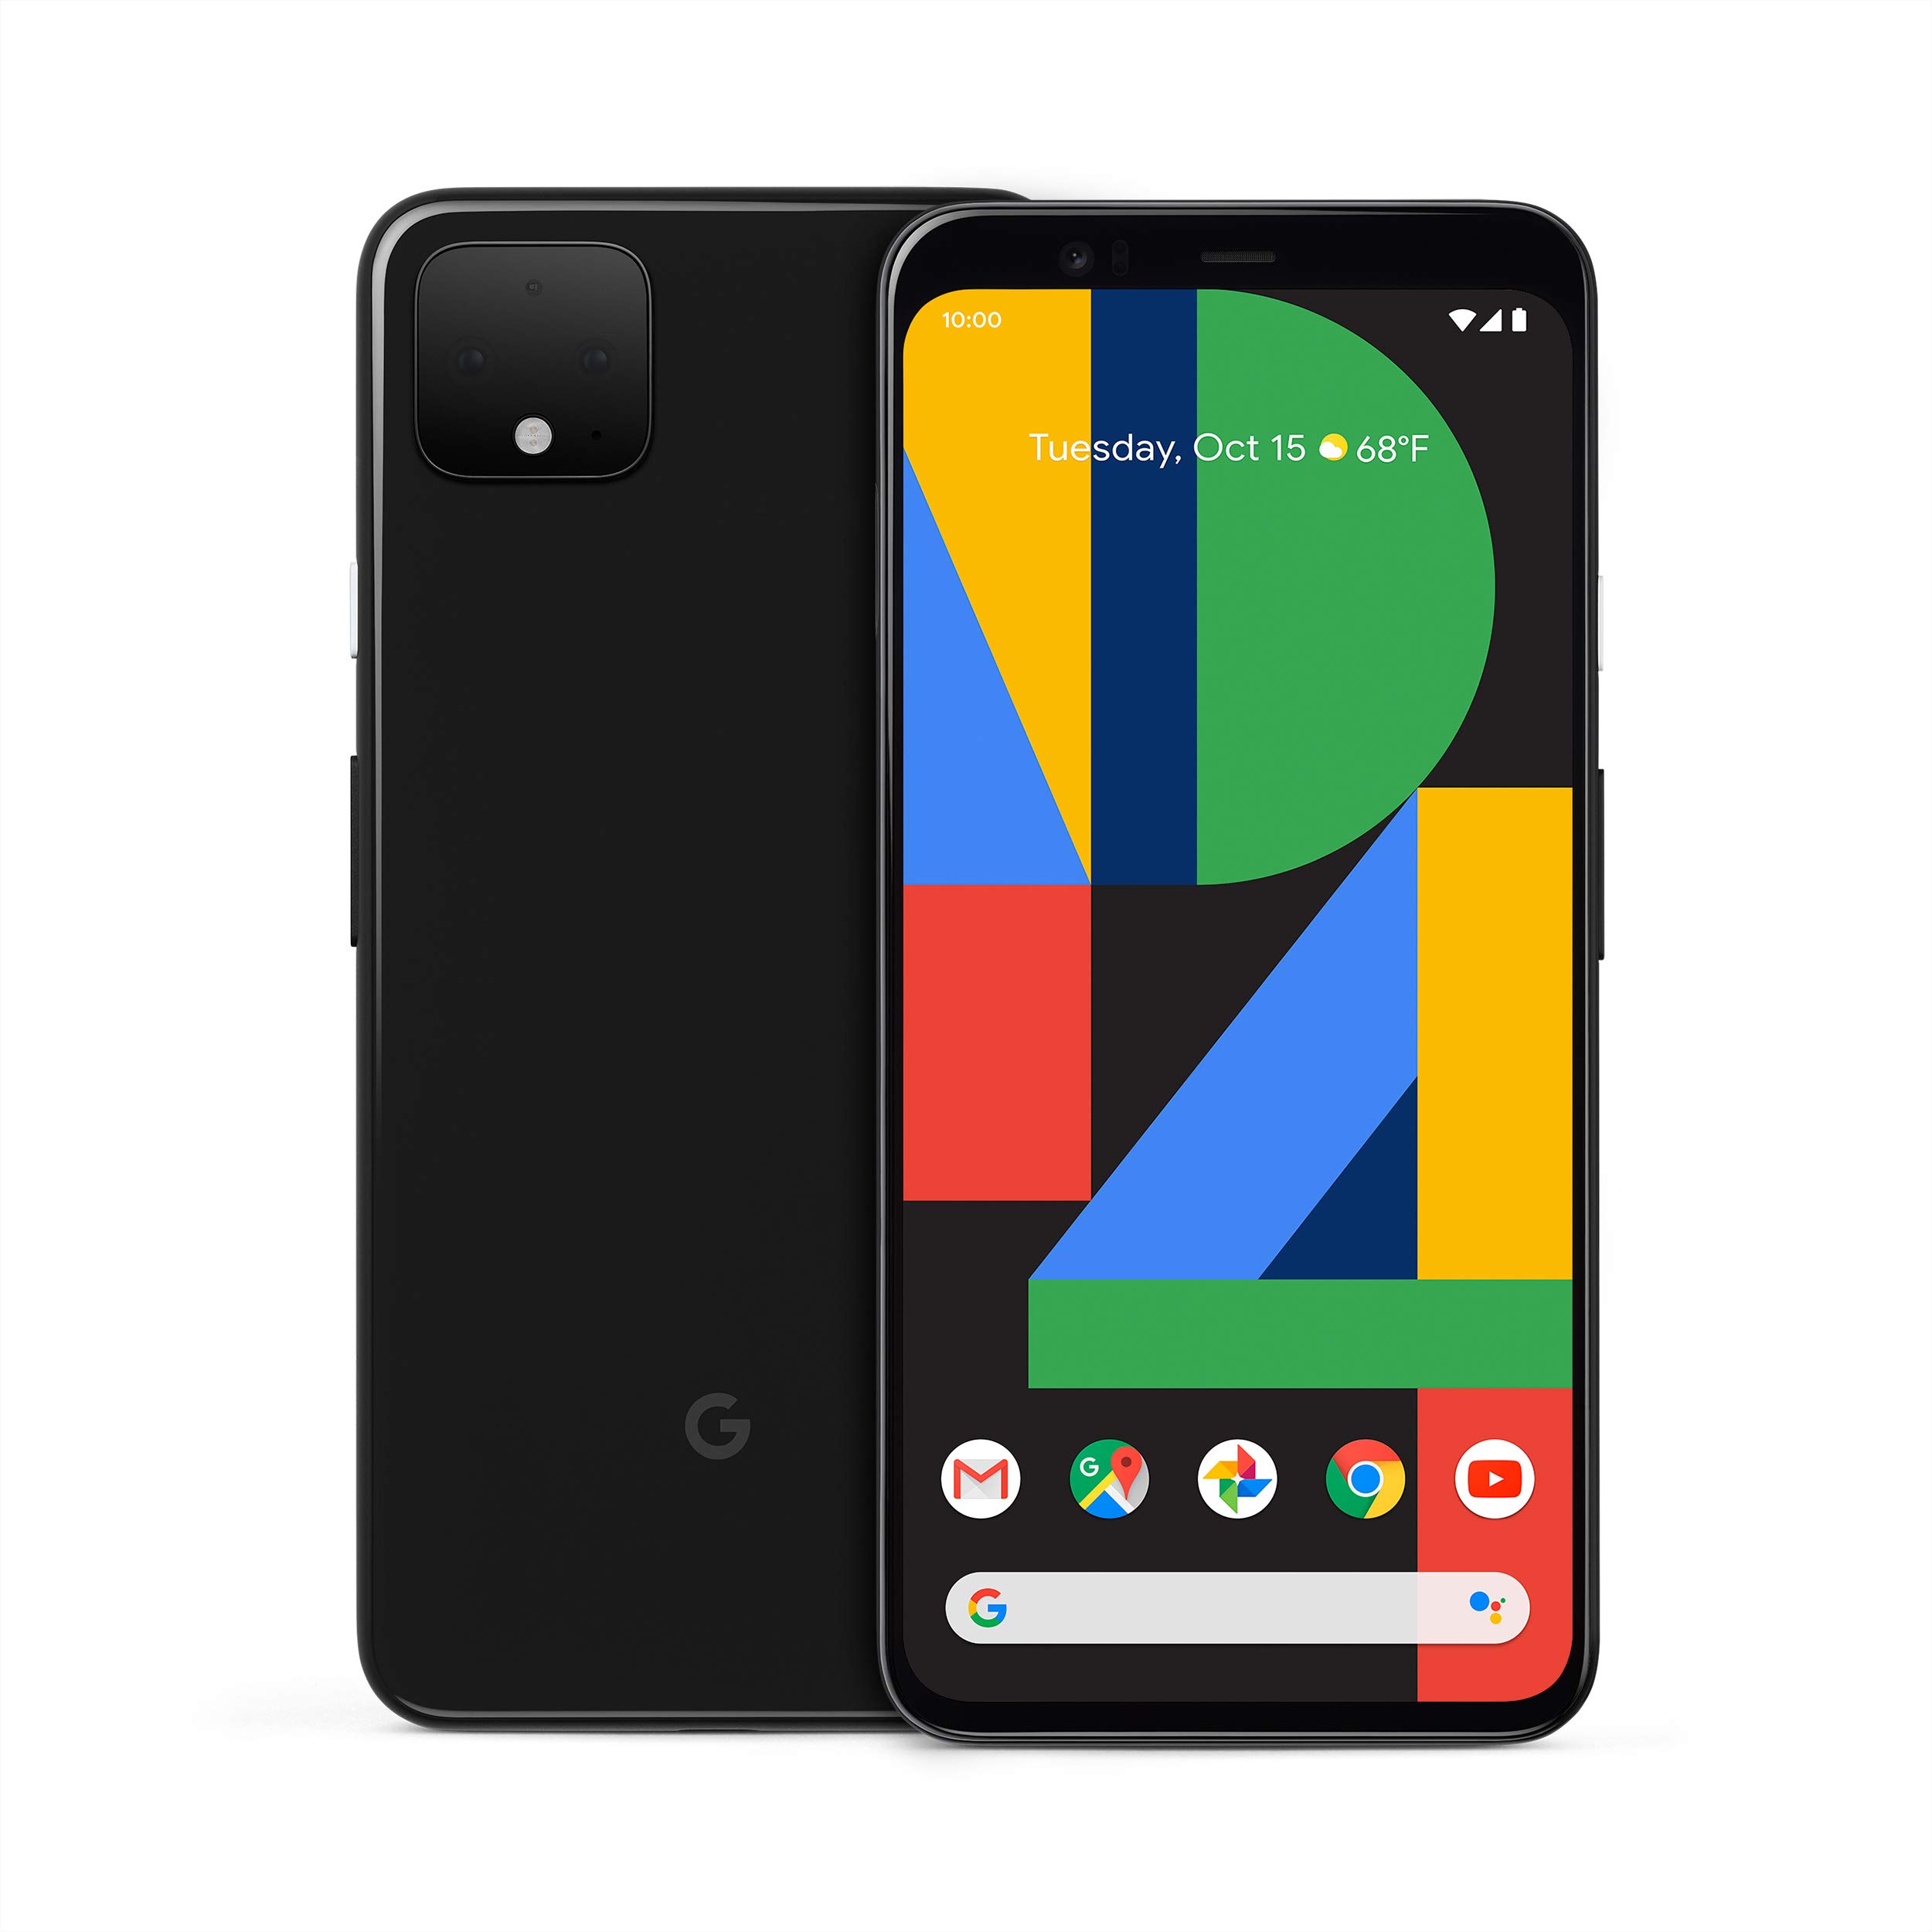 Refurbished Google Pixel 4XL 64GB comes without box and accessories